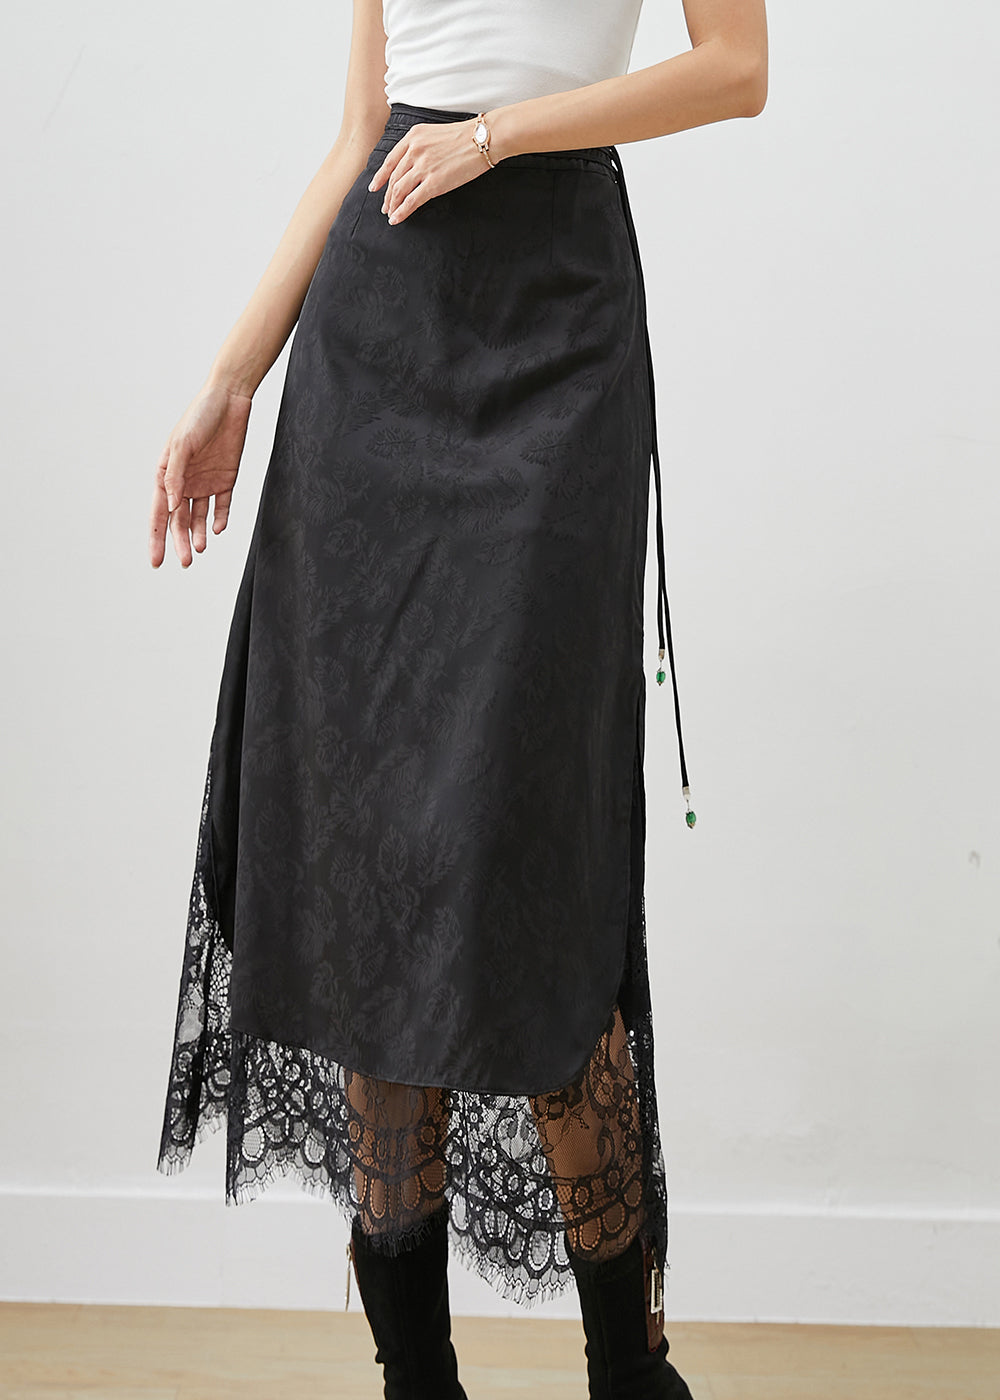 French Black Tasseled Patchwork Lace Silk Skirt Fall – Omychic